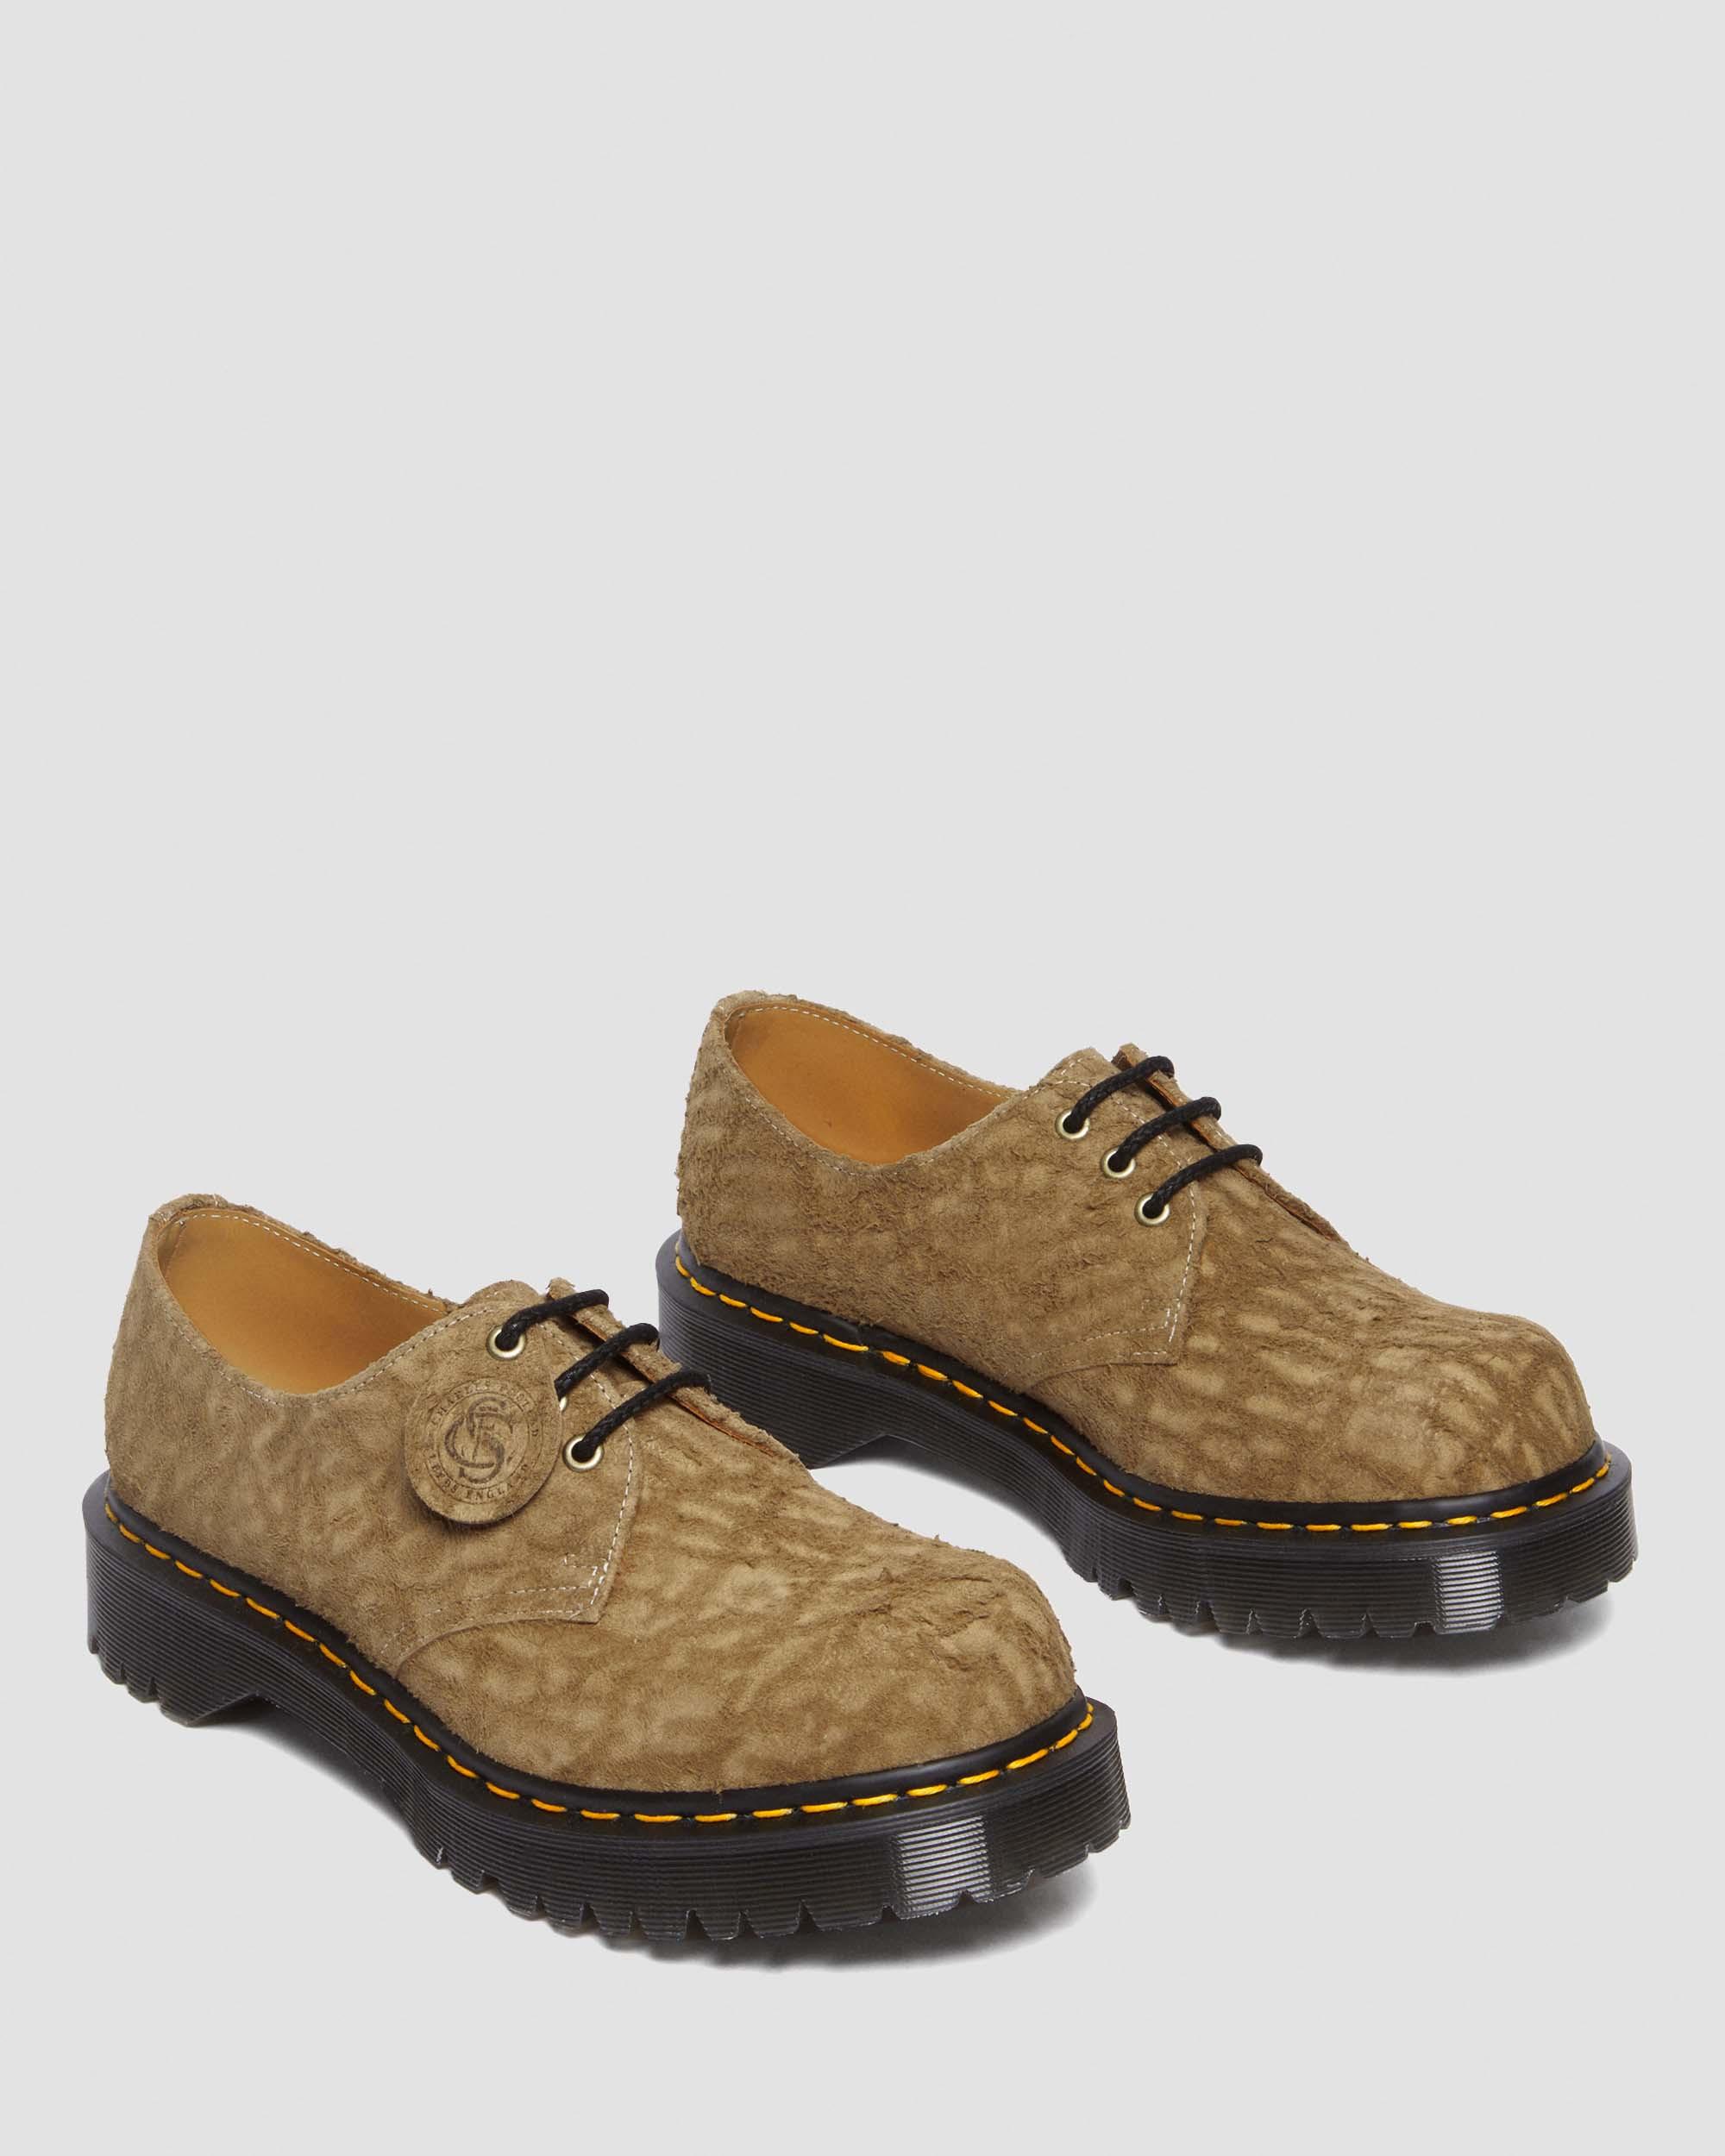 1461 Bex Made in England Emboss Suede Oxford Shoes in Savannah Tan